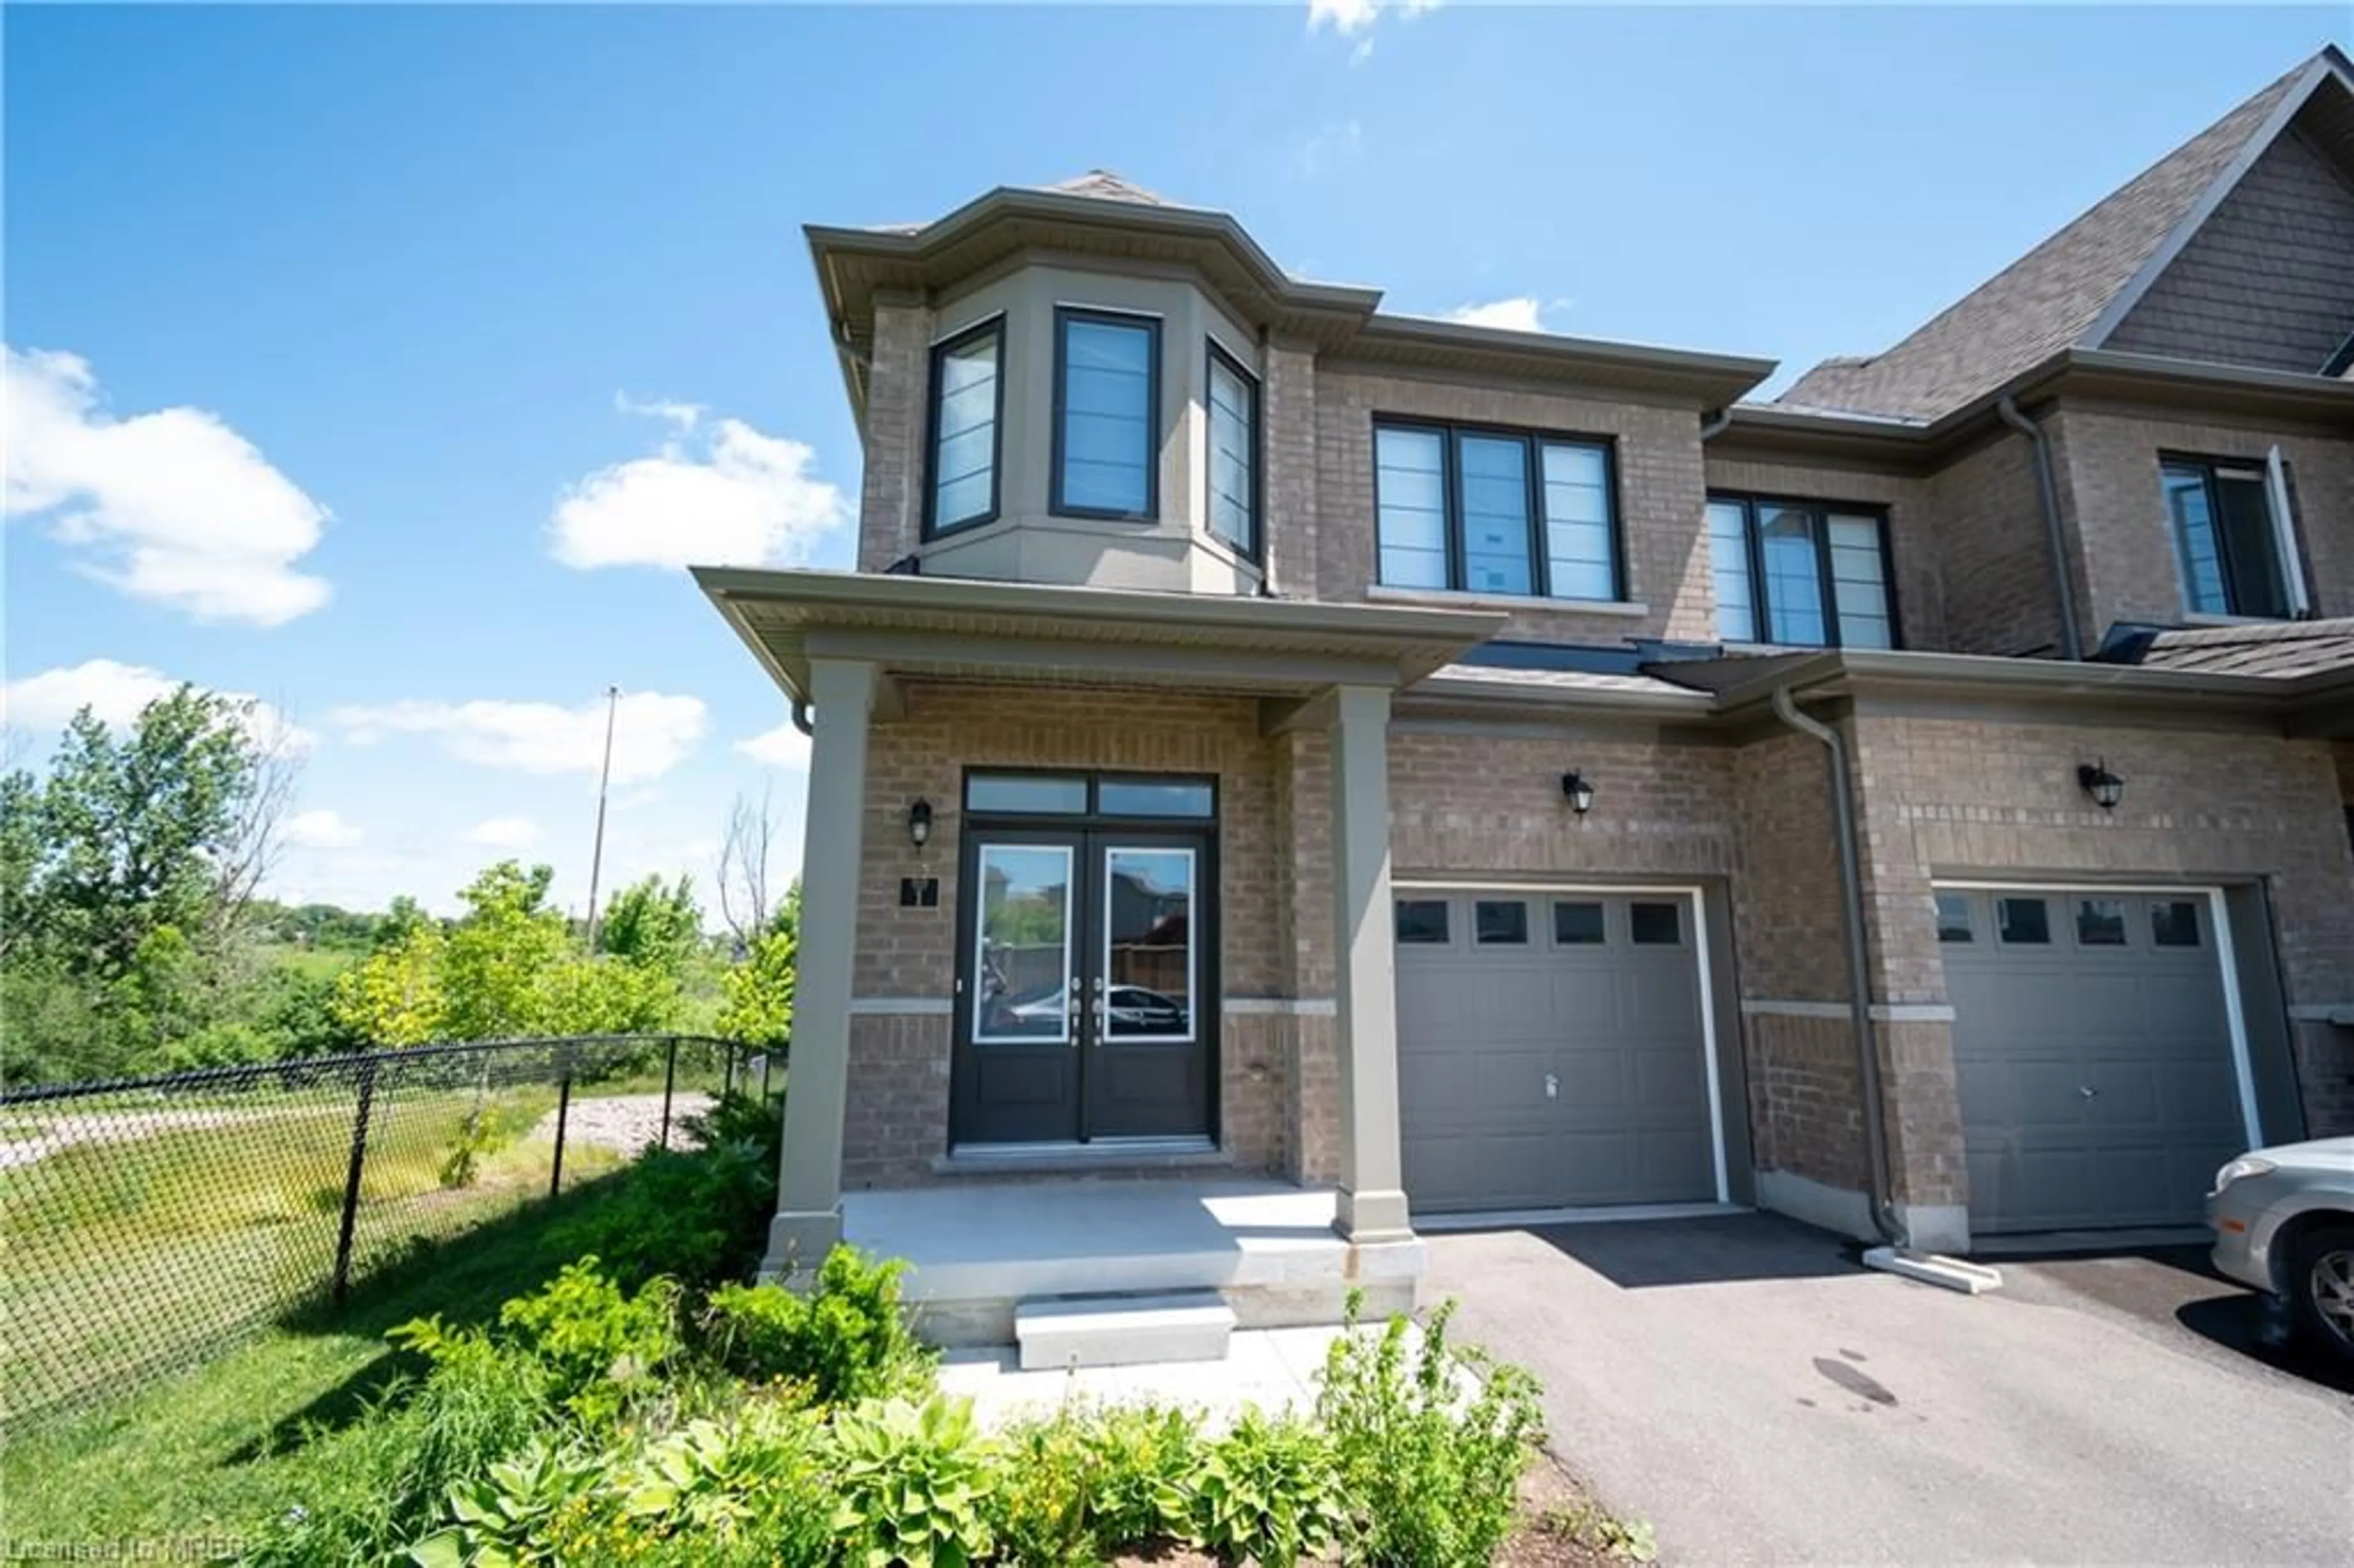 Home with brick exterior material for 166 Deerpath Dr #1, Guelph Ontario N1K 0E2